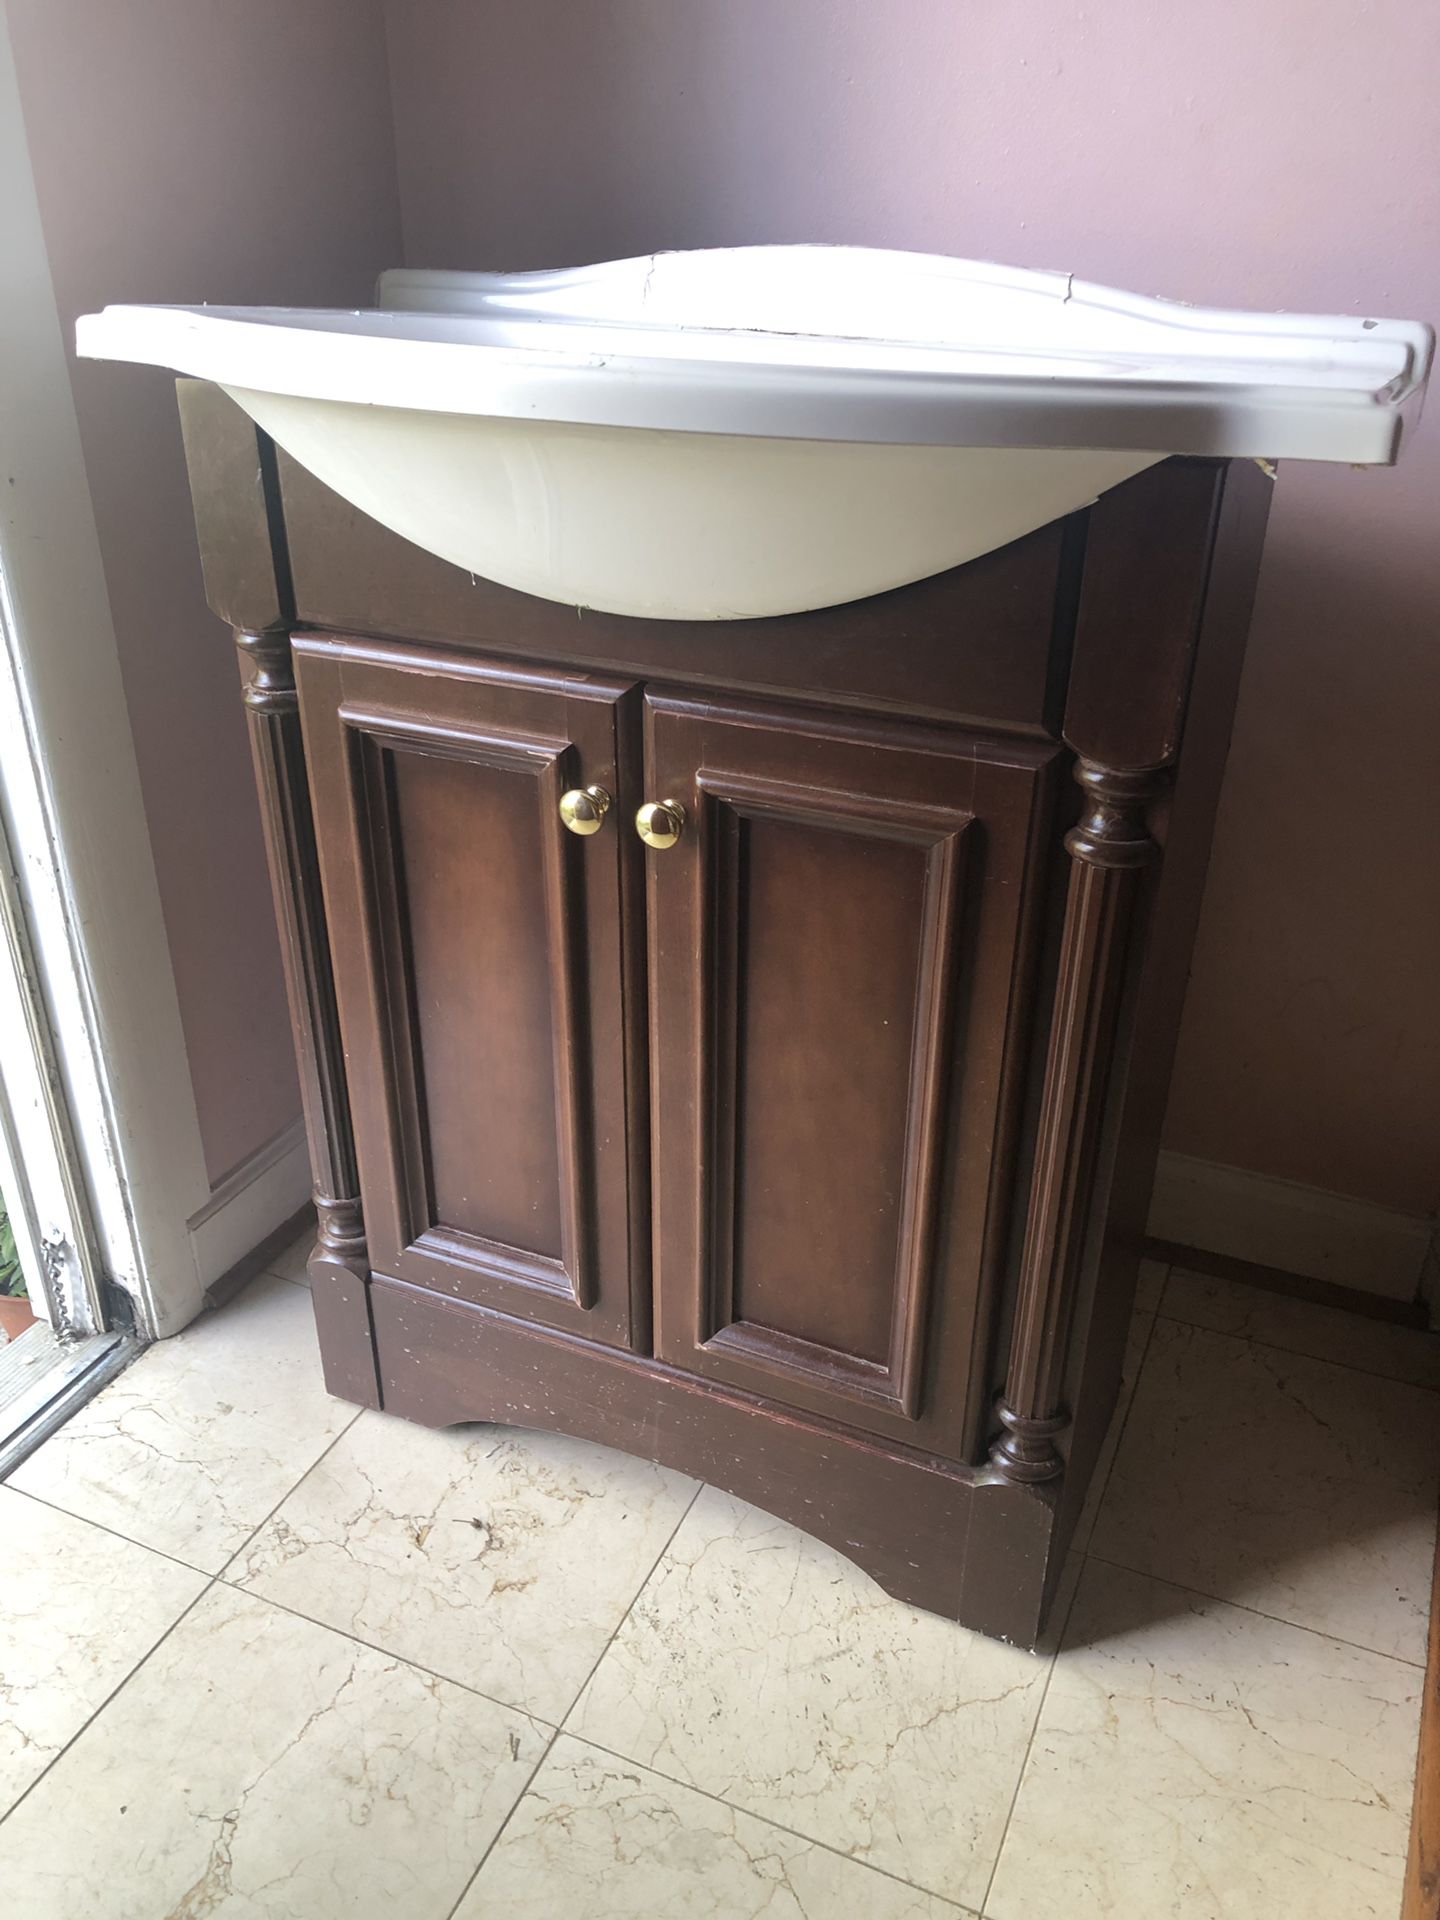 Euro style sink and cabinet